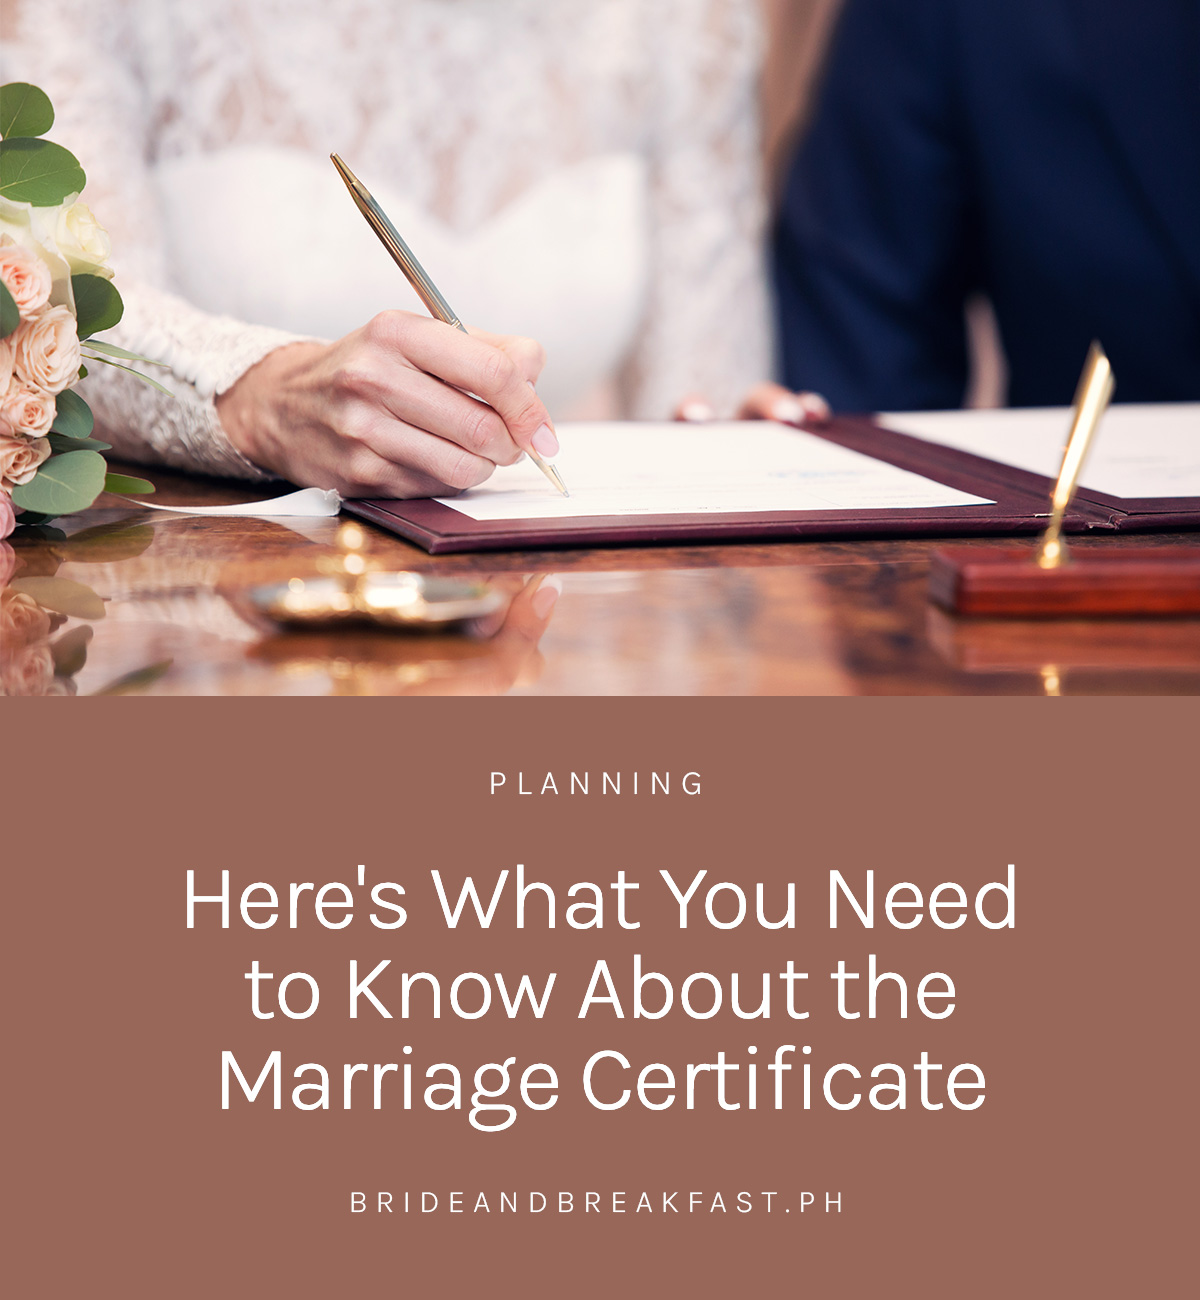 Here's What You Need to Know About the Marriage Certificate